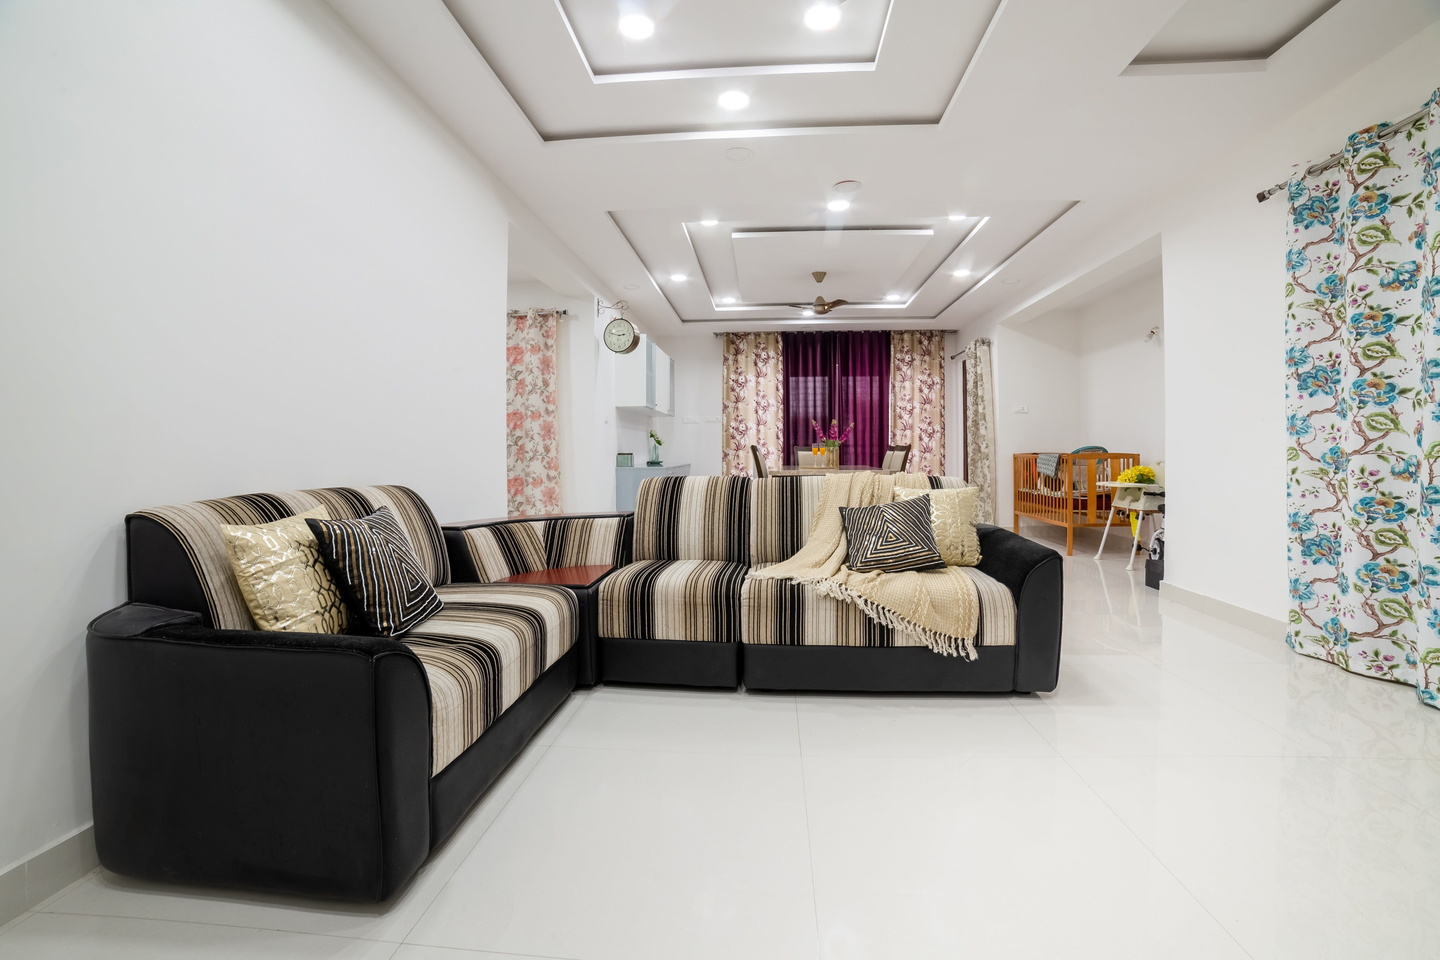 Spacious House Design For 3-BHK Hyderabad Flat - Livspace